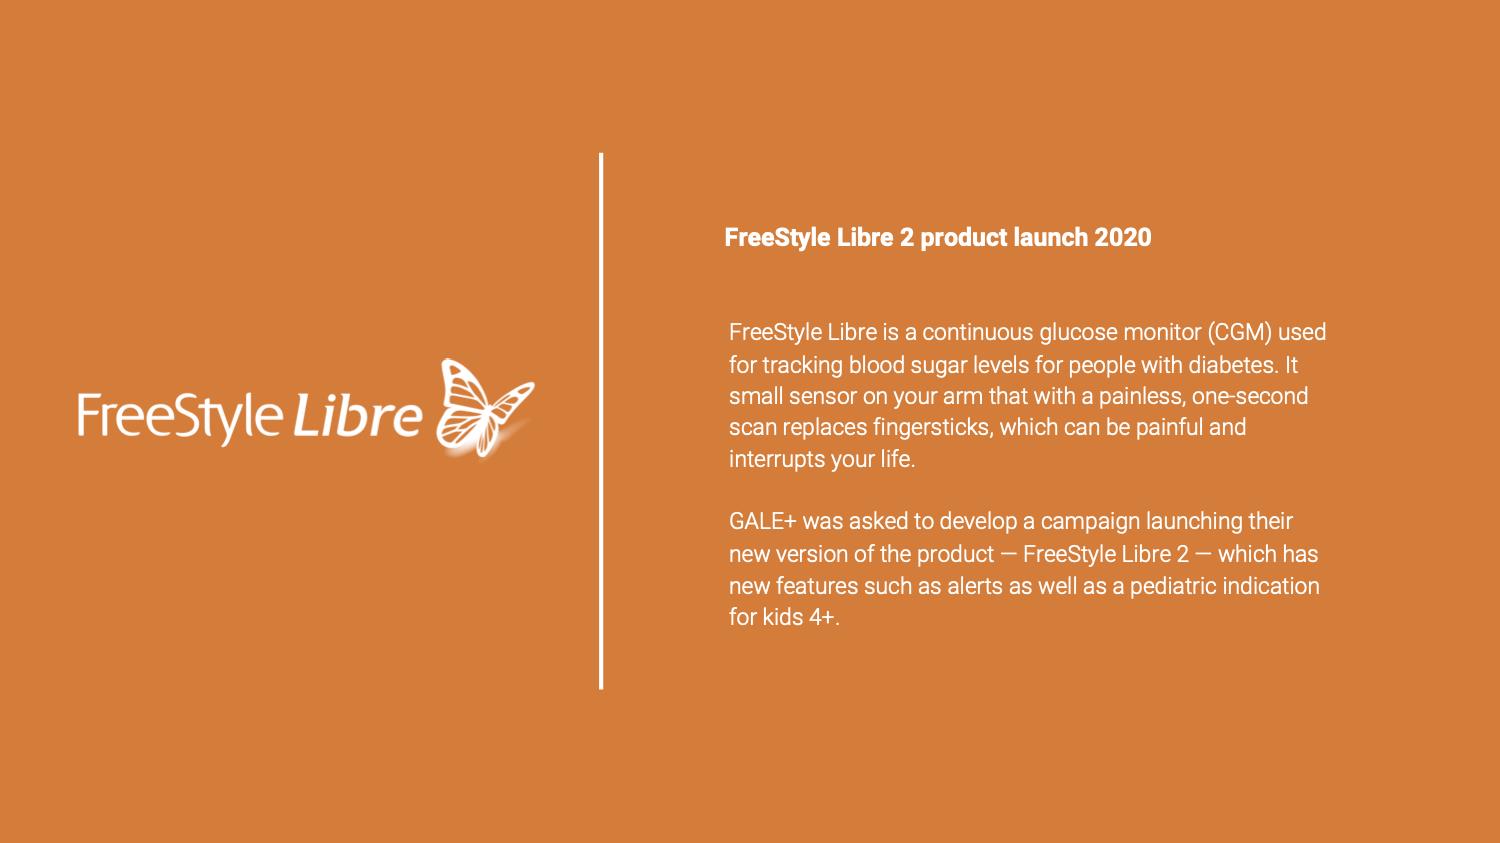 GALE+ for FreeStyle Libre